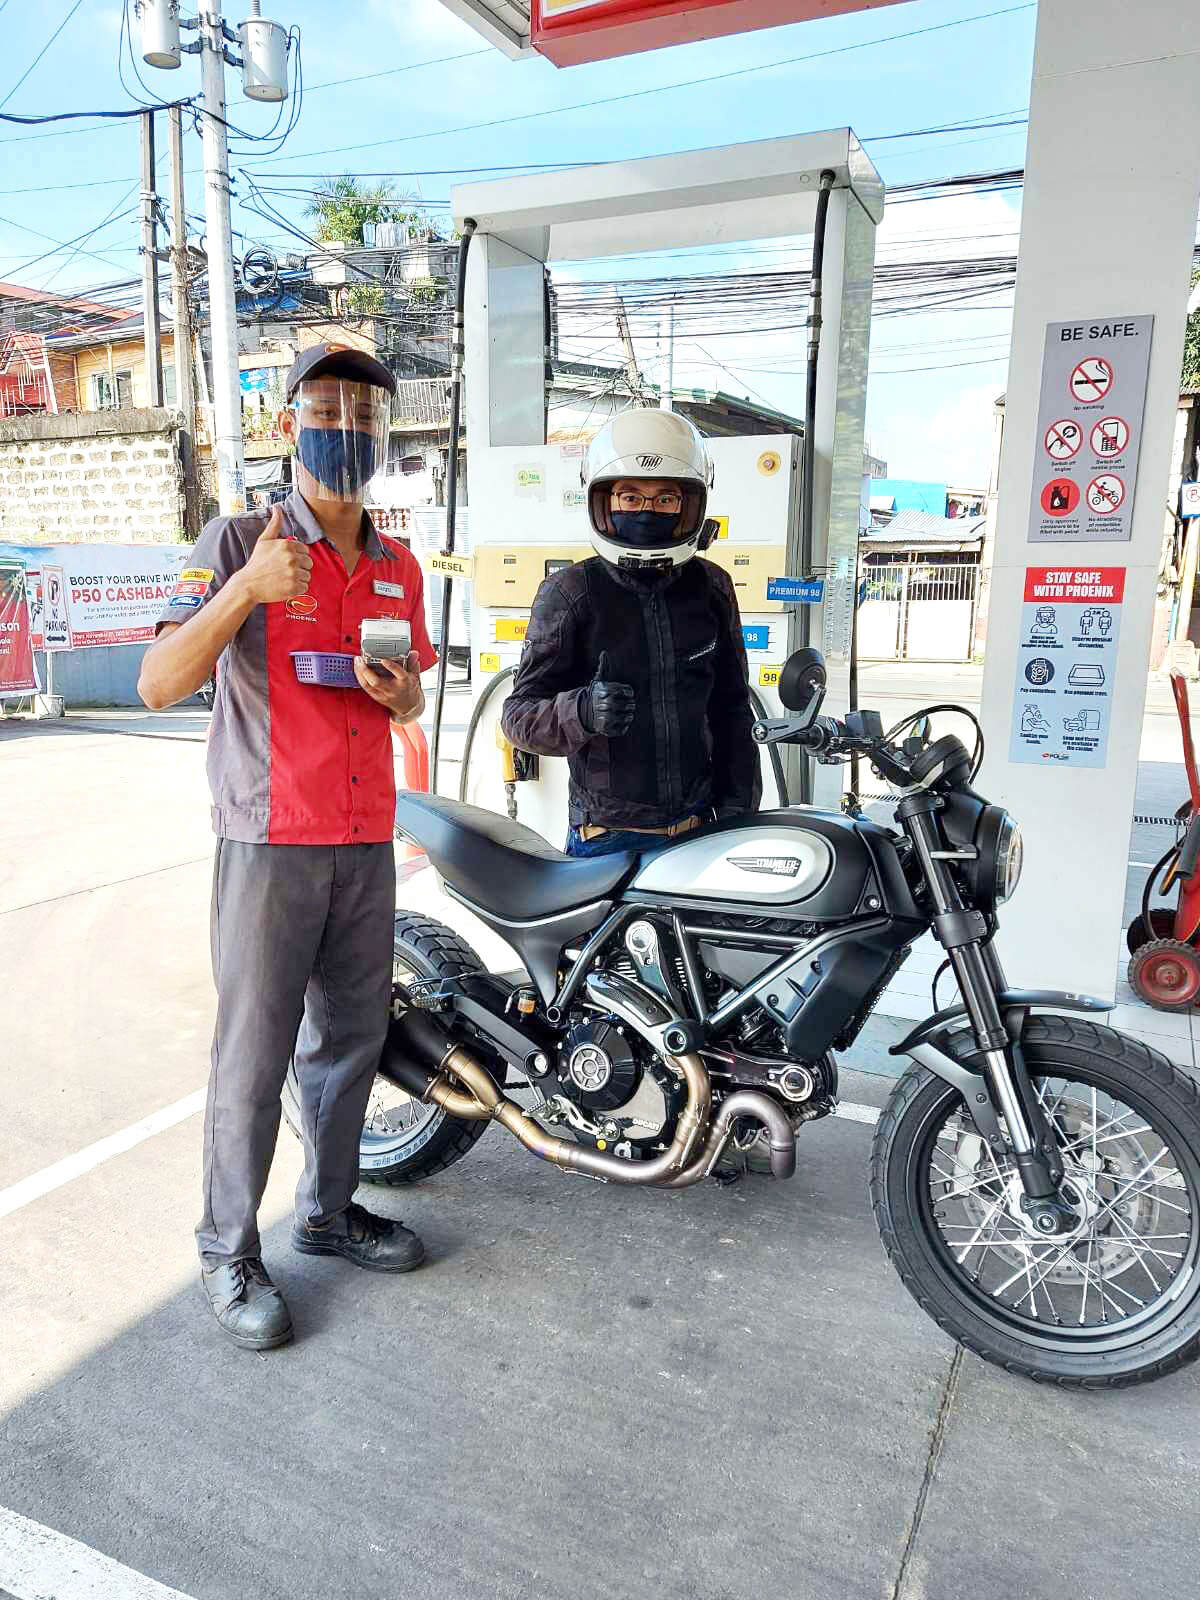 A motorist redeems his discounted fuel voucher at a Phoenix gas station through the Limitless app

